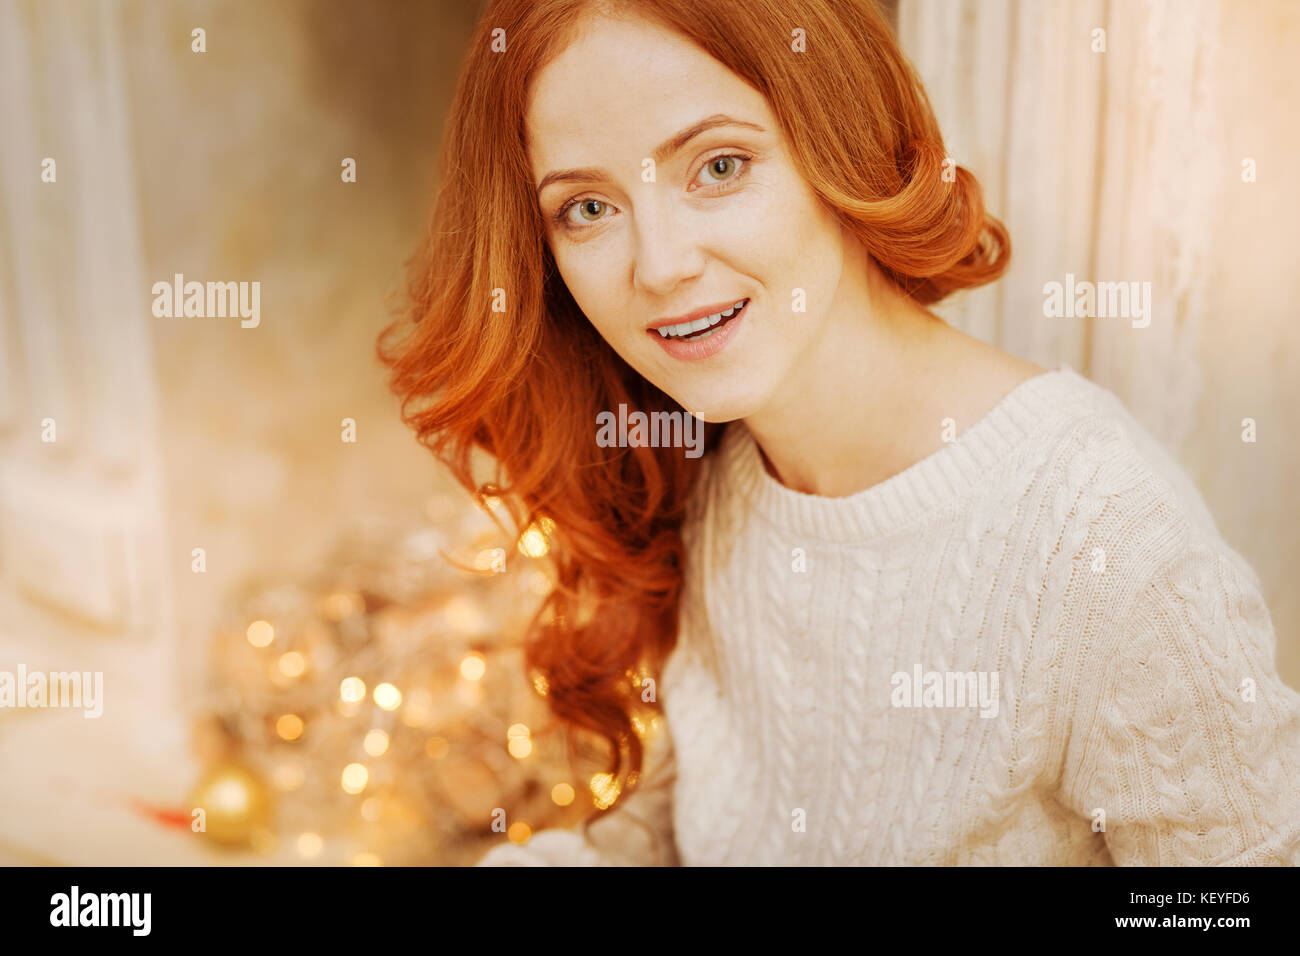 Beautiful lady looking into the camera with slight smile Stock Photo